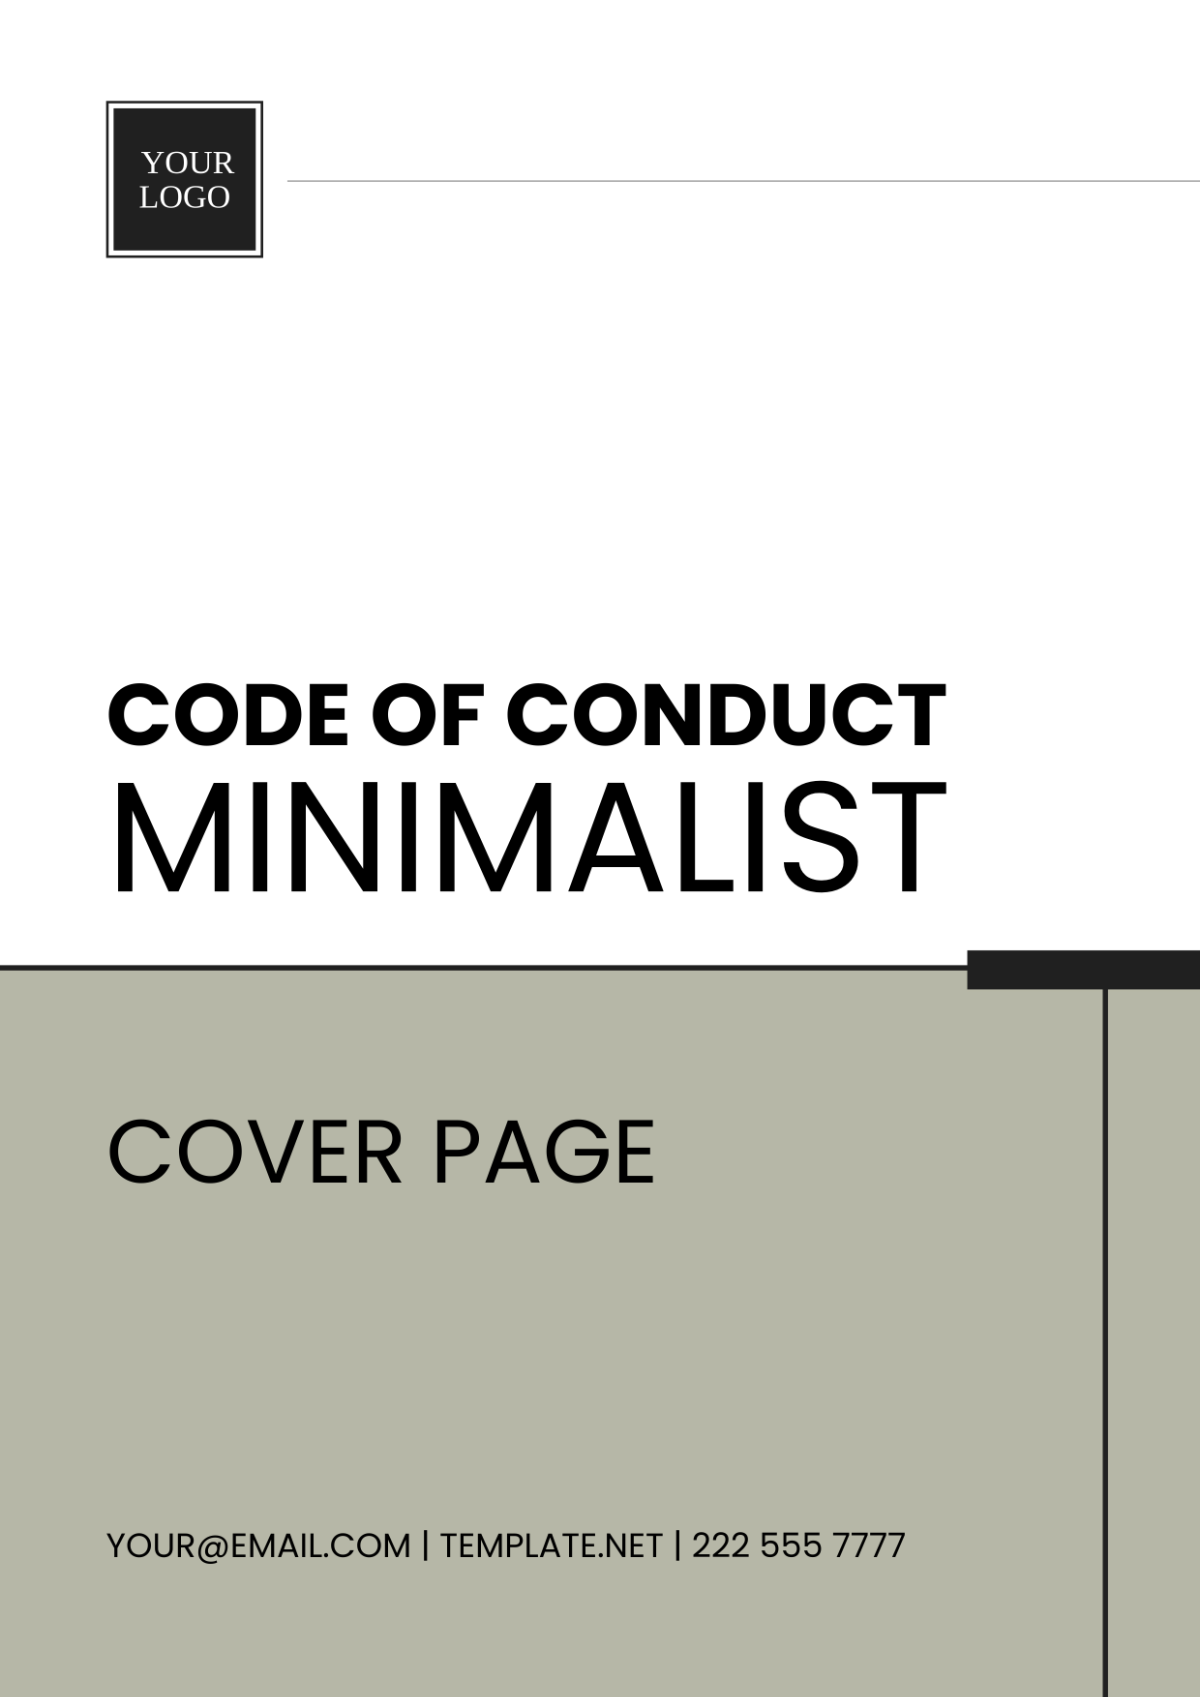 Free Code of Conduct Minimalist Cover Page Template